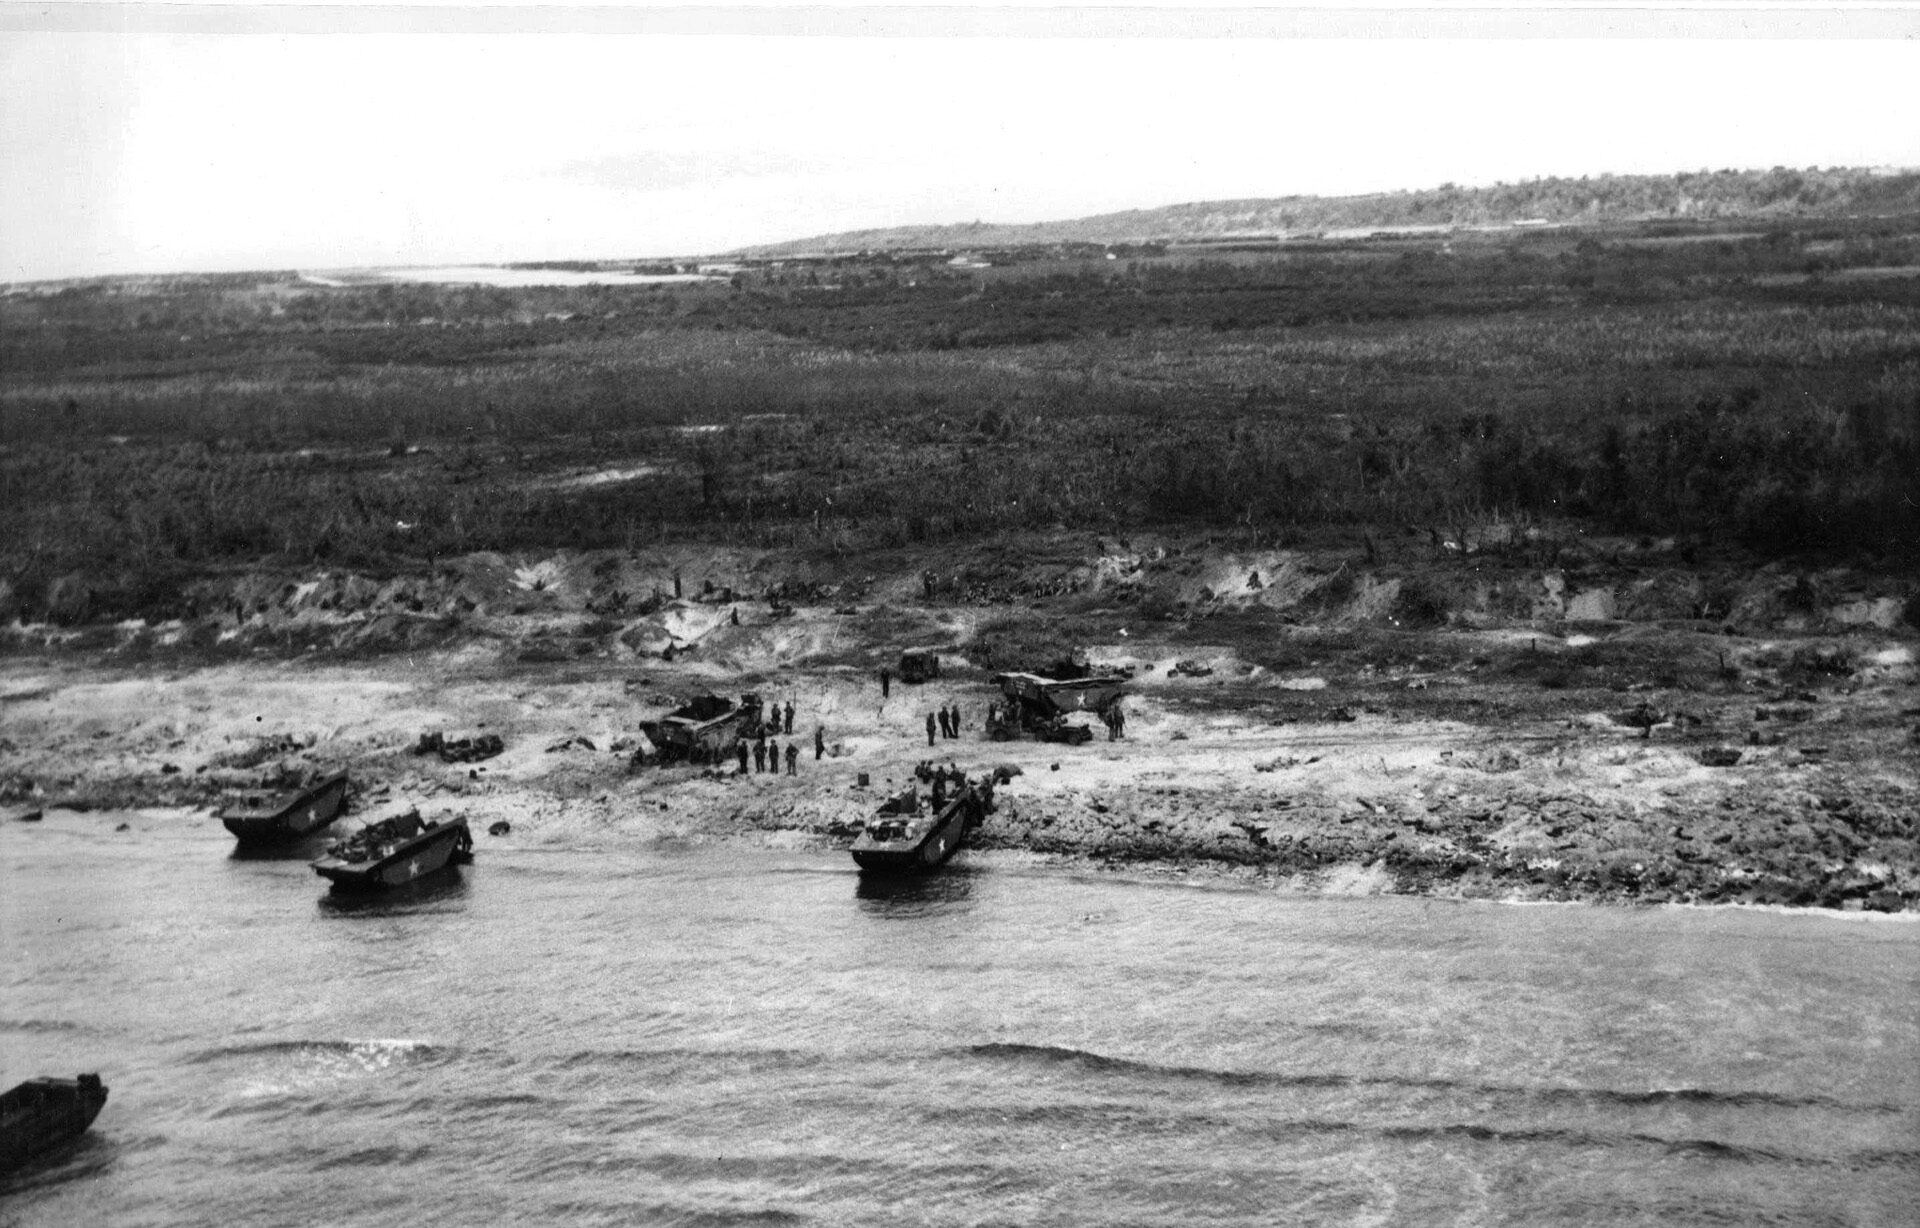 Marine foxholes dot the area near a landing beach on the island of Tinian as amphibious landing craft continue to bring troops and supplies ashore. Tinian later became a substantial air base for American heavy bombers.